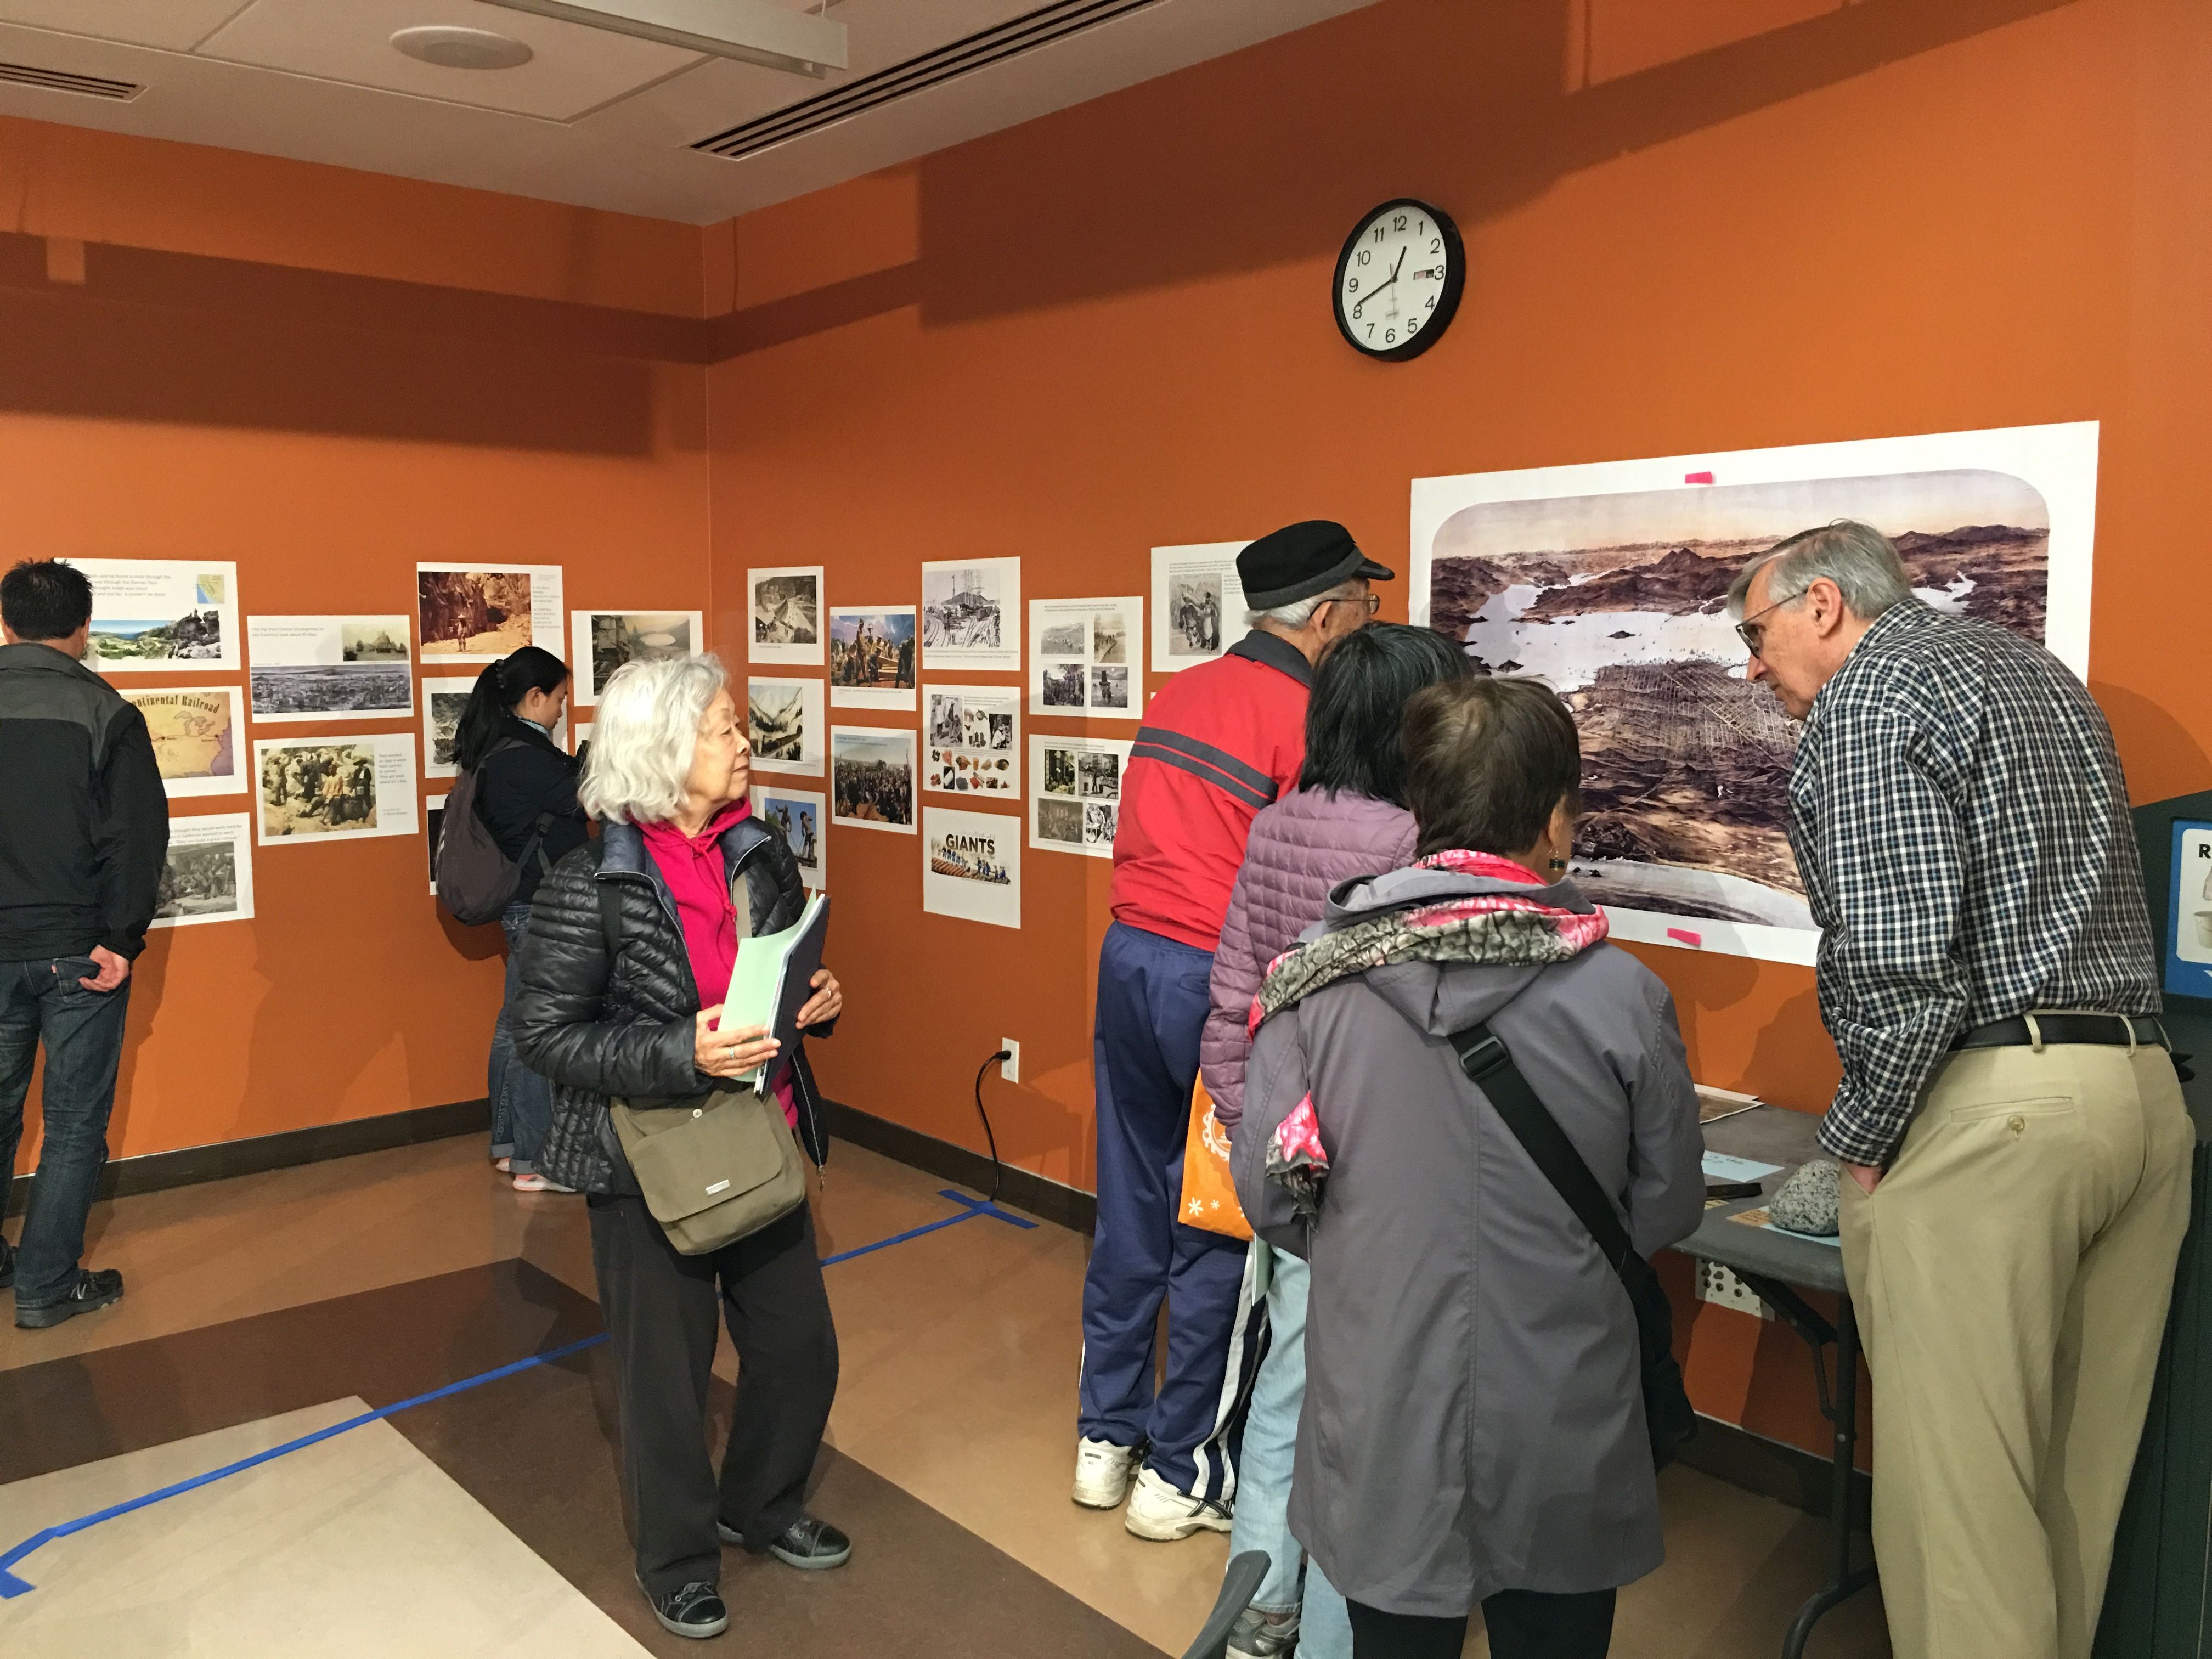 Adults looking at the wall exhibit